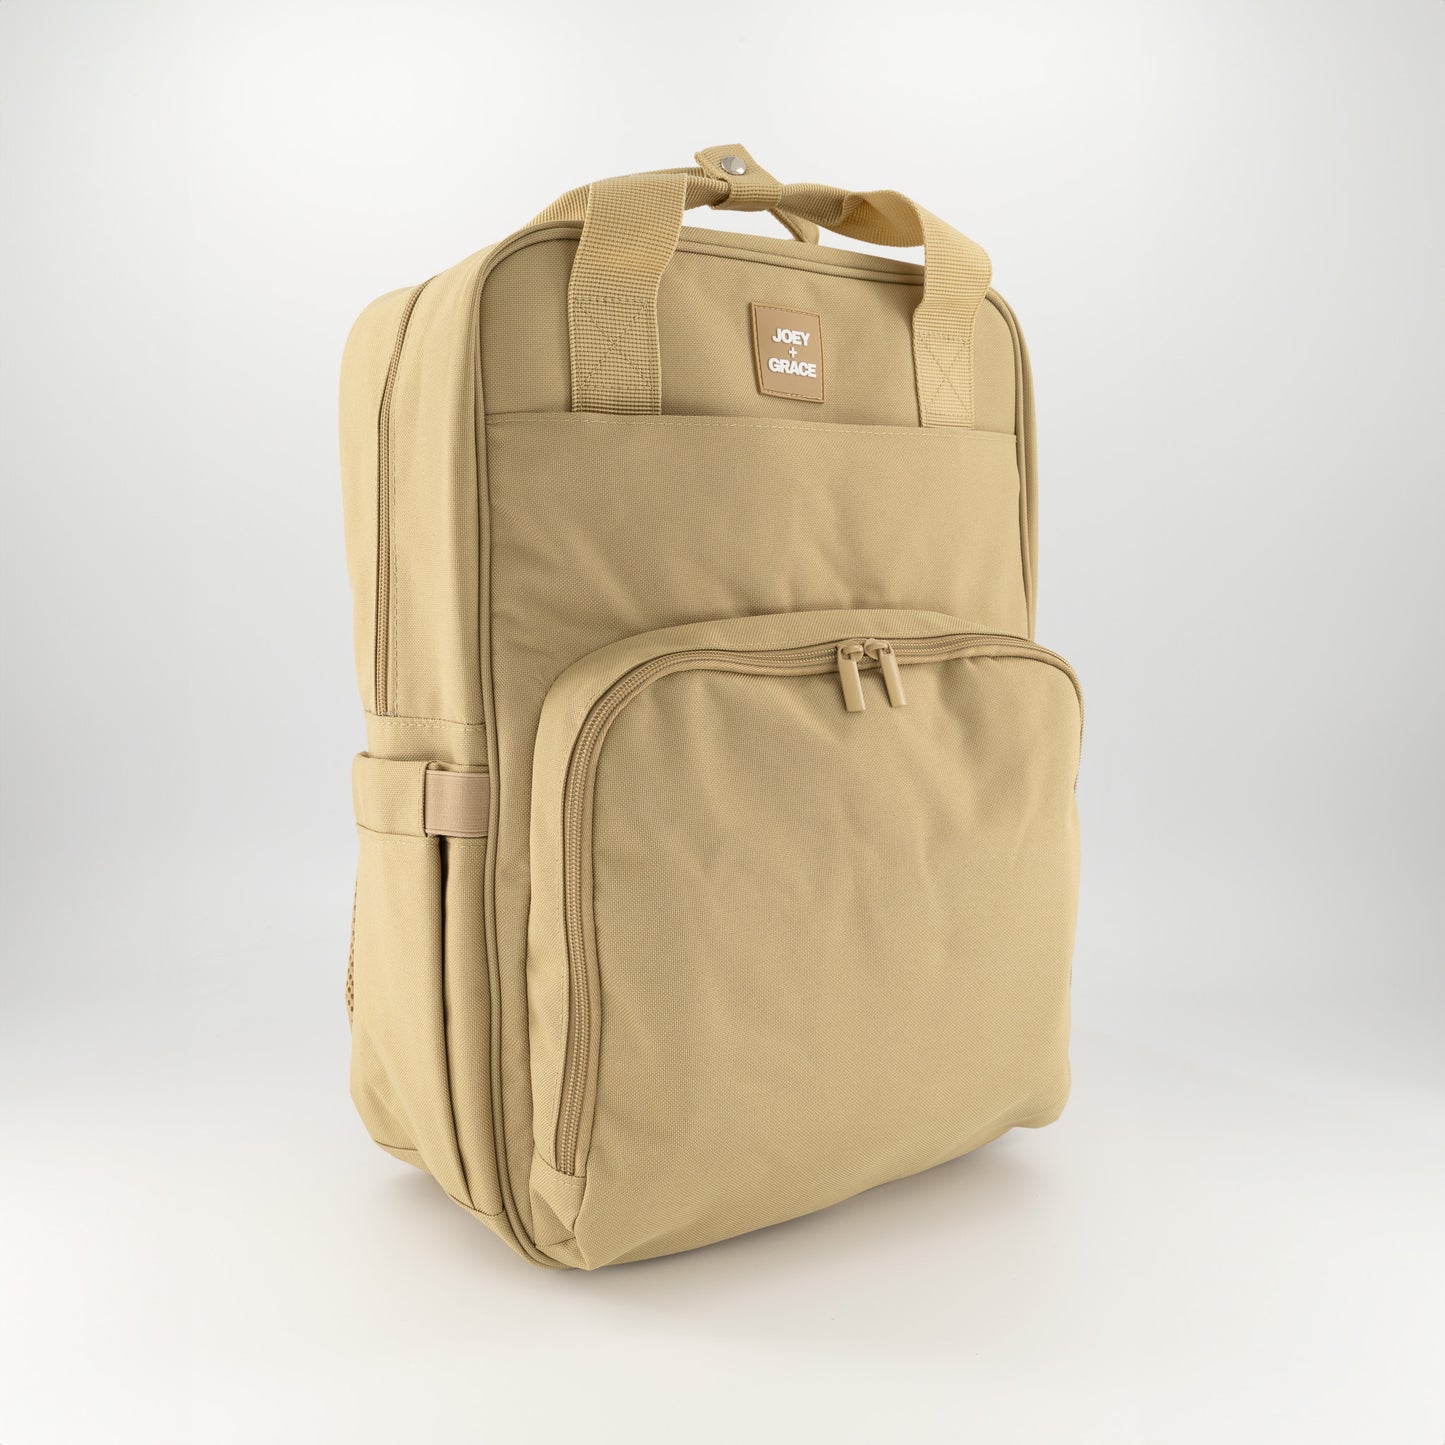 The Camy Nappy Backpack (Sandy Beige)